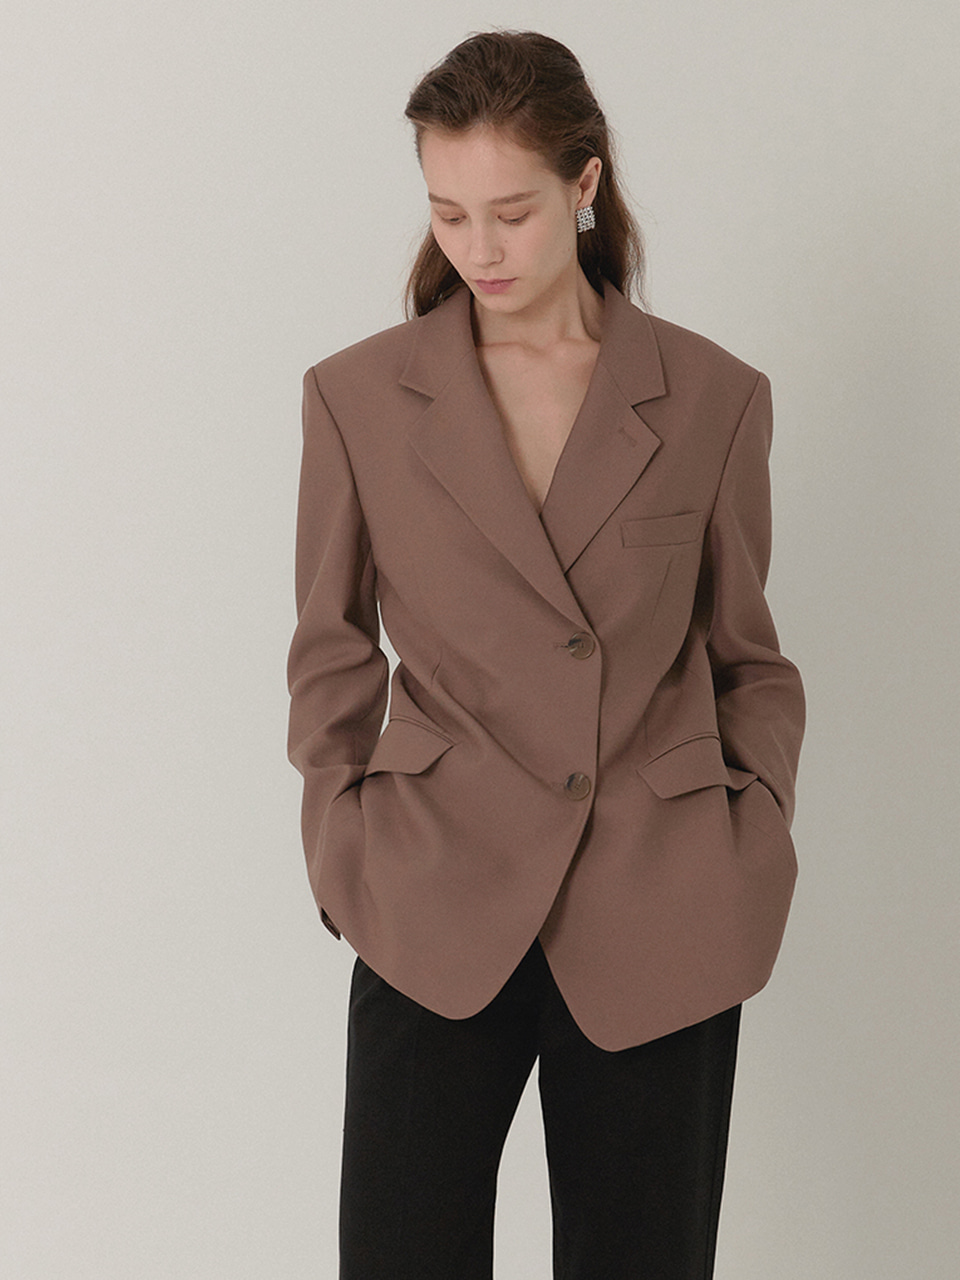 AMBER Classic Tailored Half Double Jacket_DUST COCOA